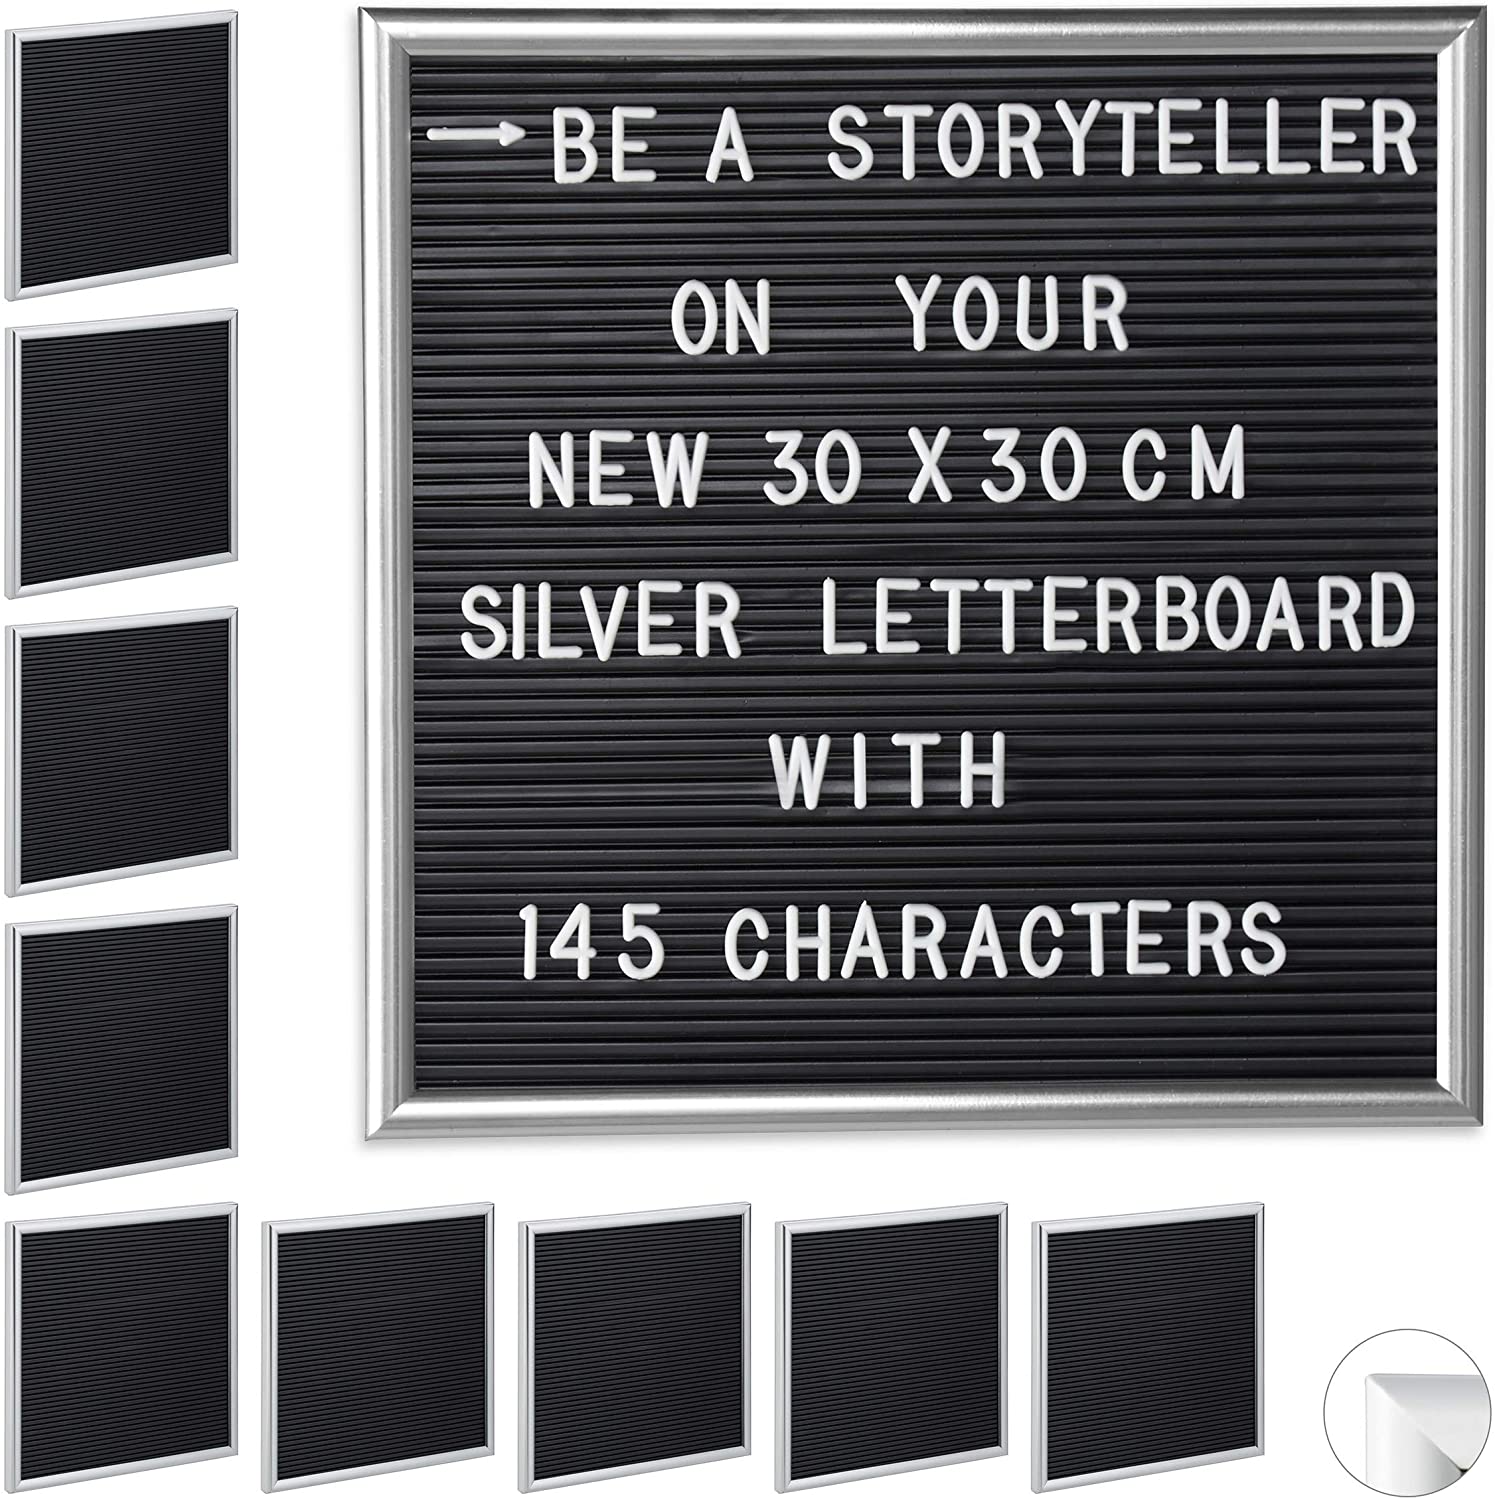 10 x Wooden Frame Letterboards, 145 Letters, Numbers & Special Characters, Slotted Groove Board 30 x 30 cm, Silver